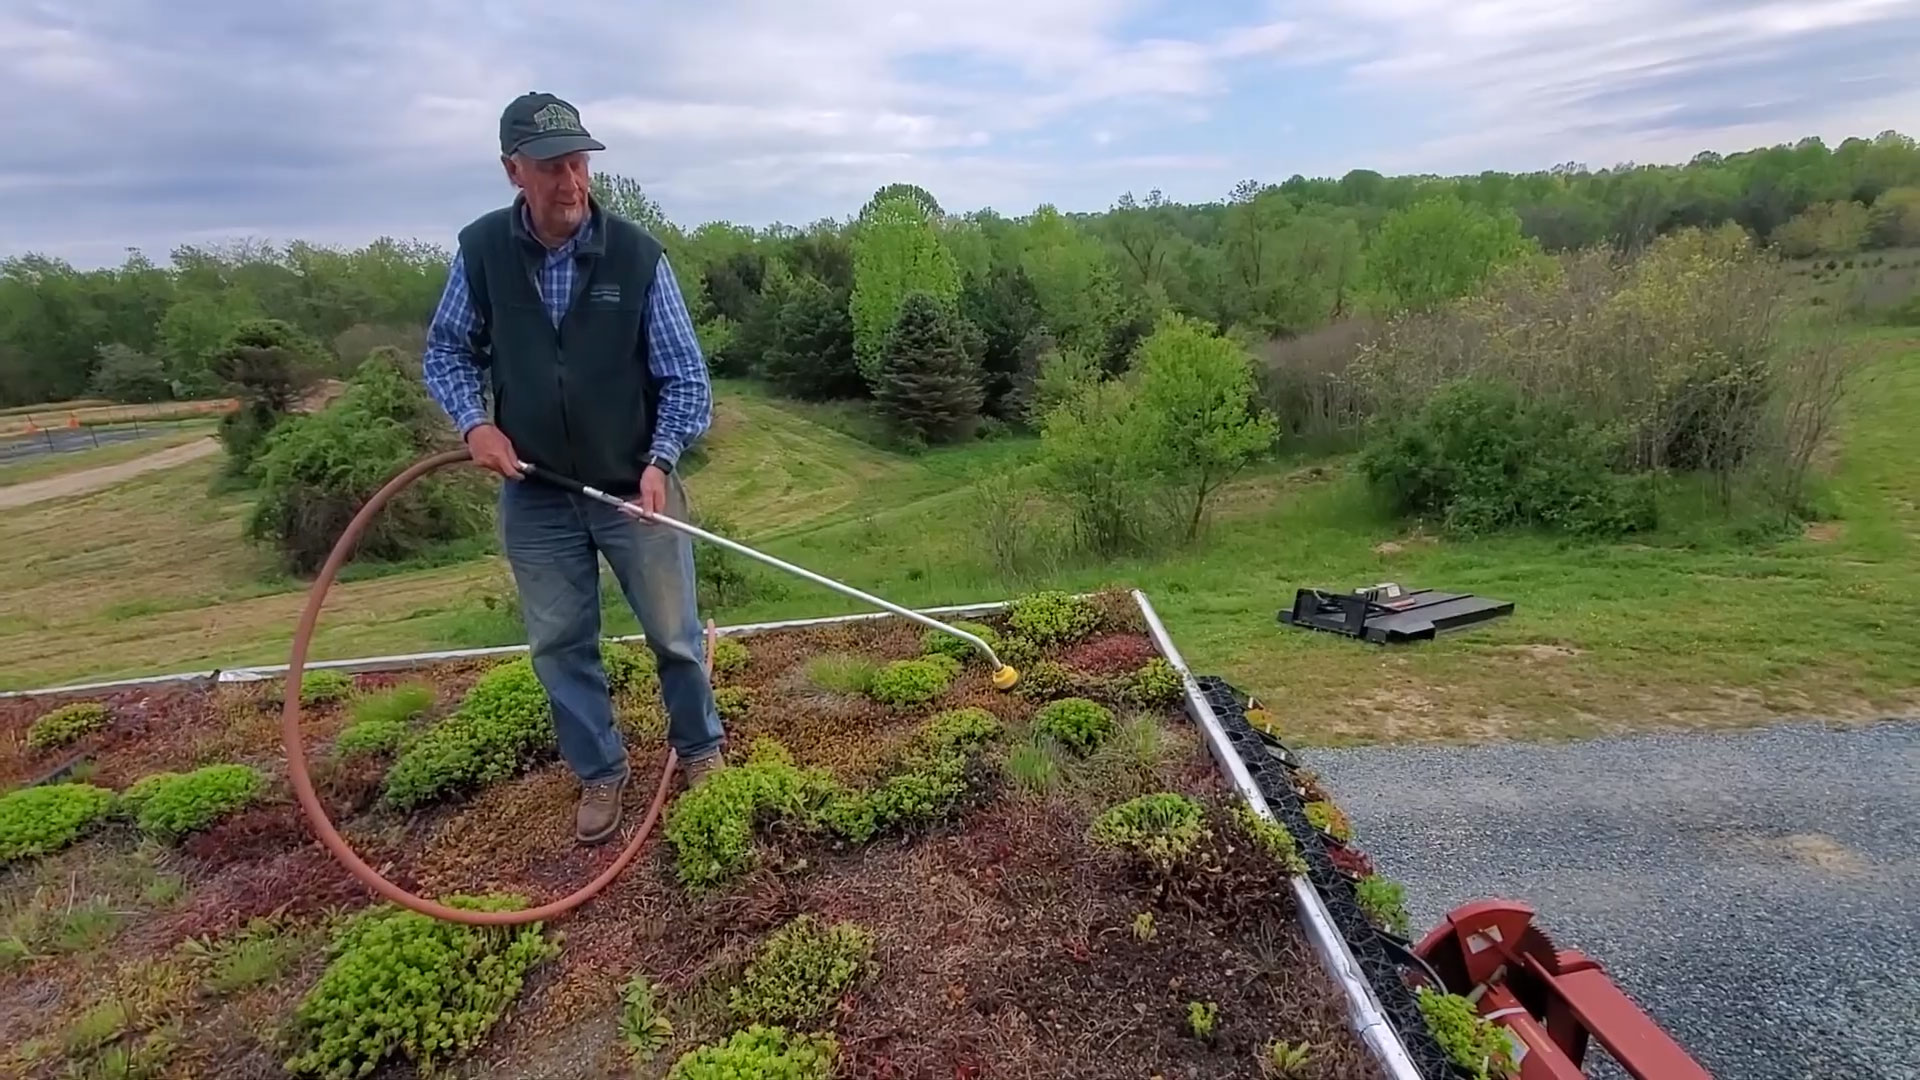 Green Roof Weed Control Using Saturated Steam